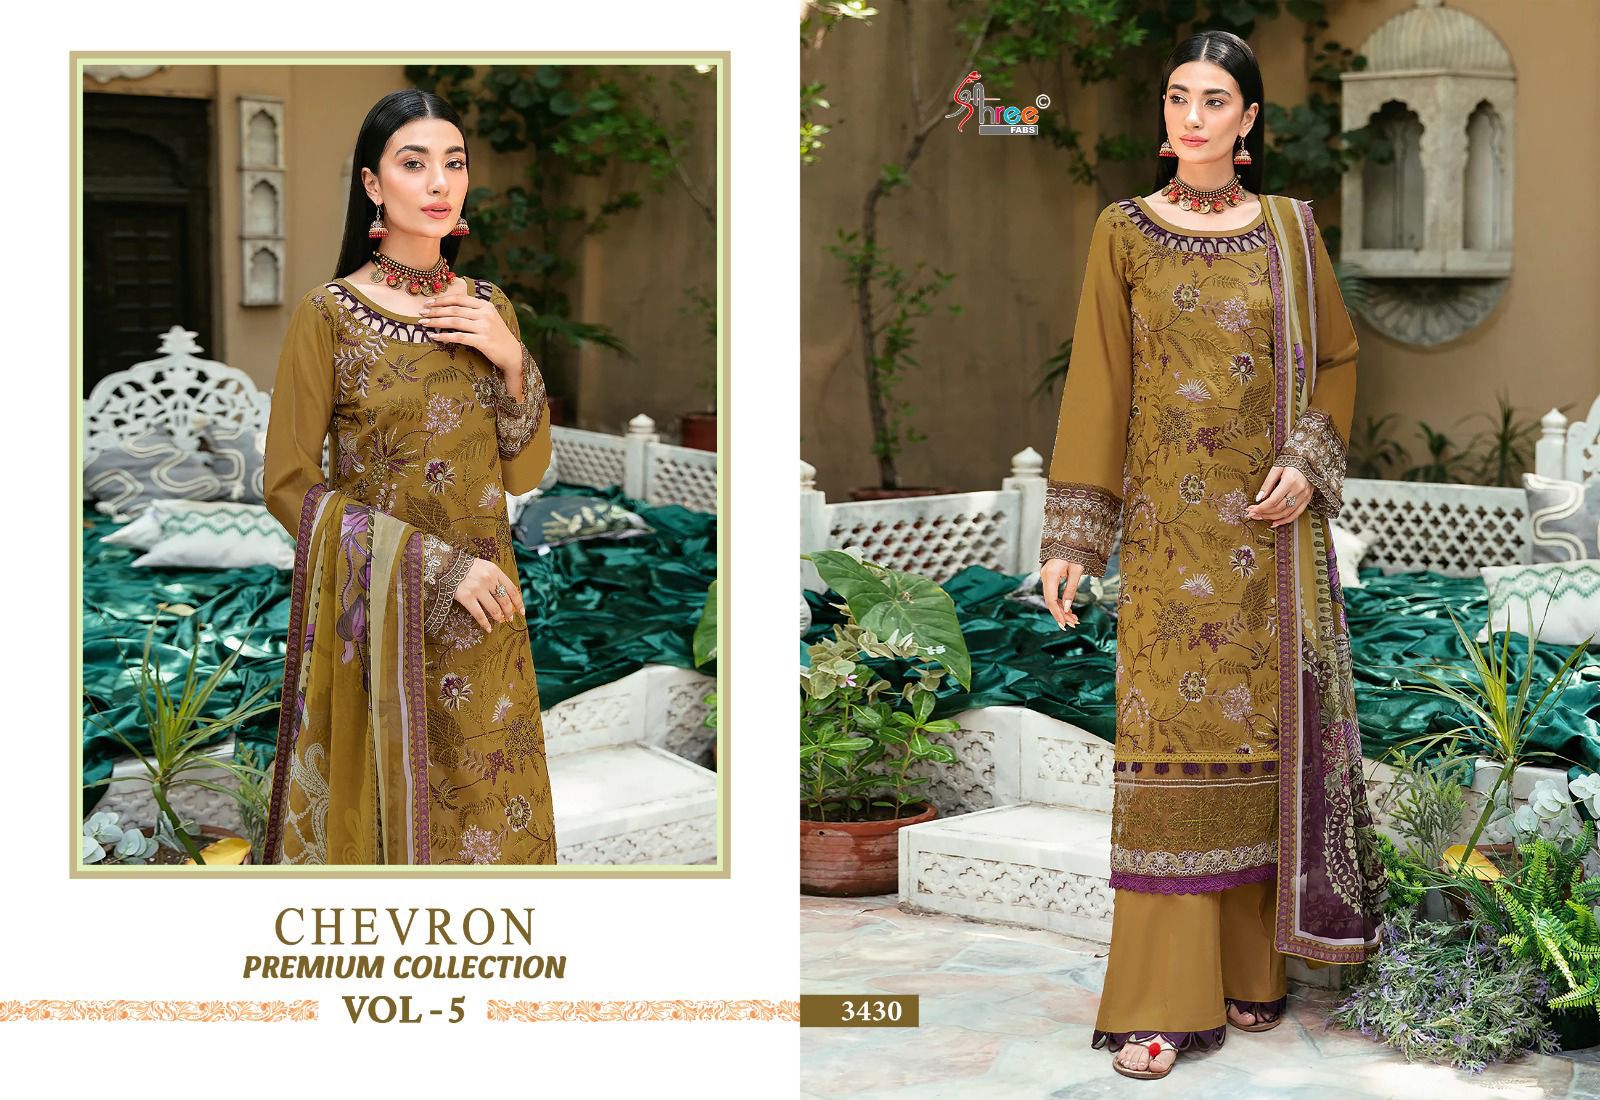 Shree Fabs Chevron Premium Collection Vol 5 Rayon With Embroidery Work Salwar Suits Supplier In Surat